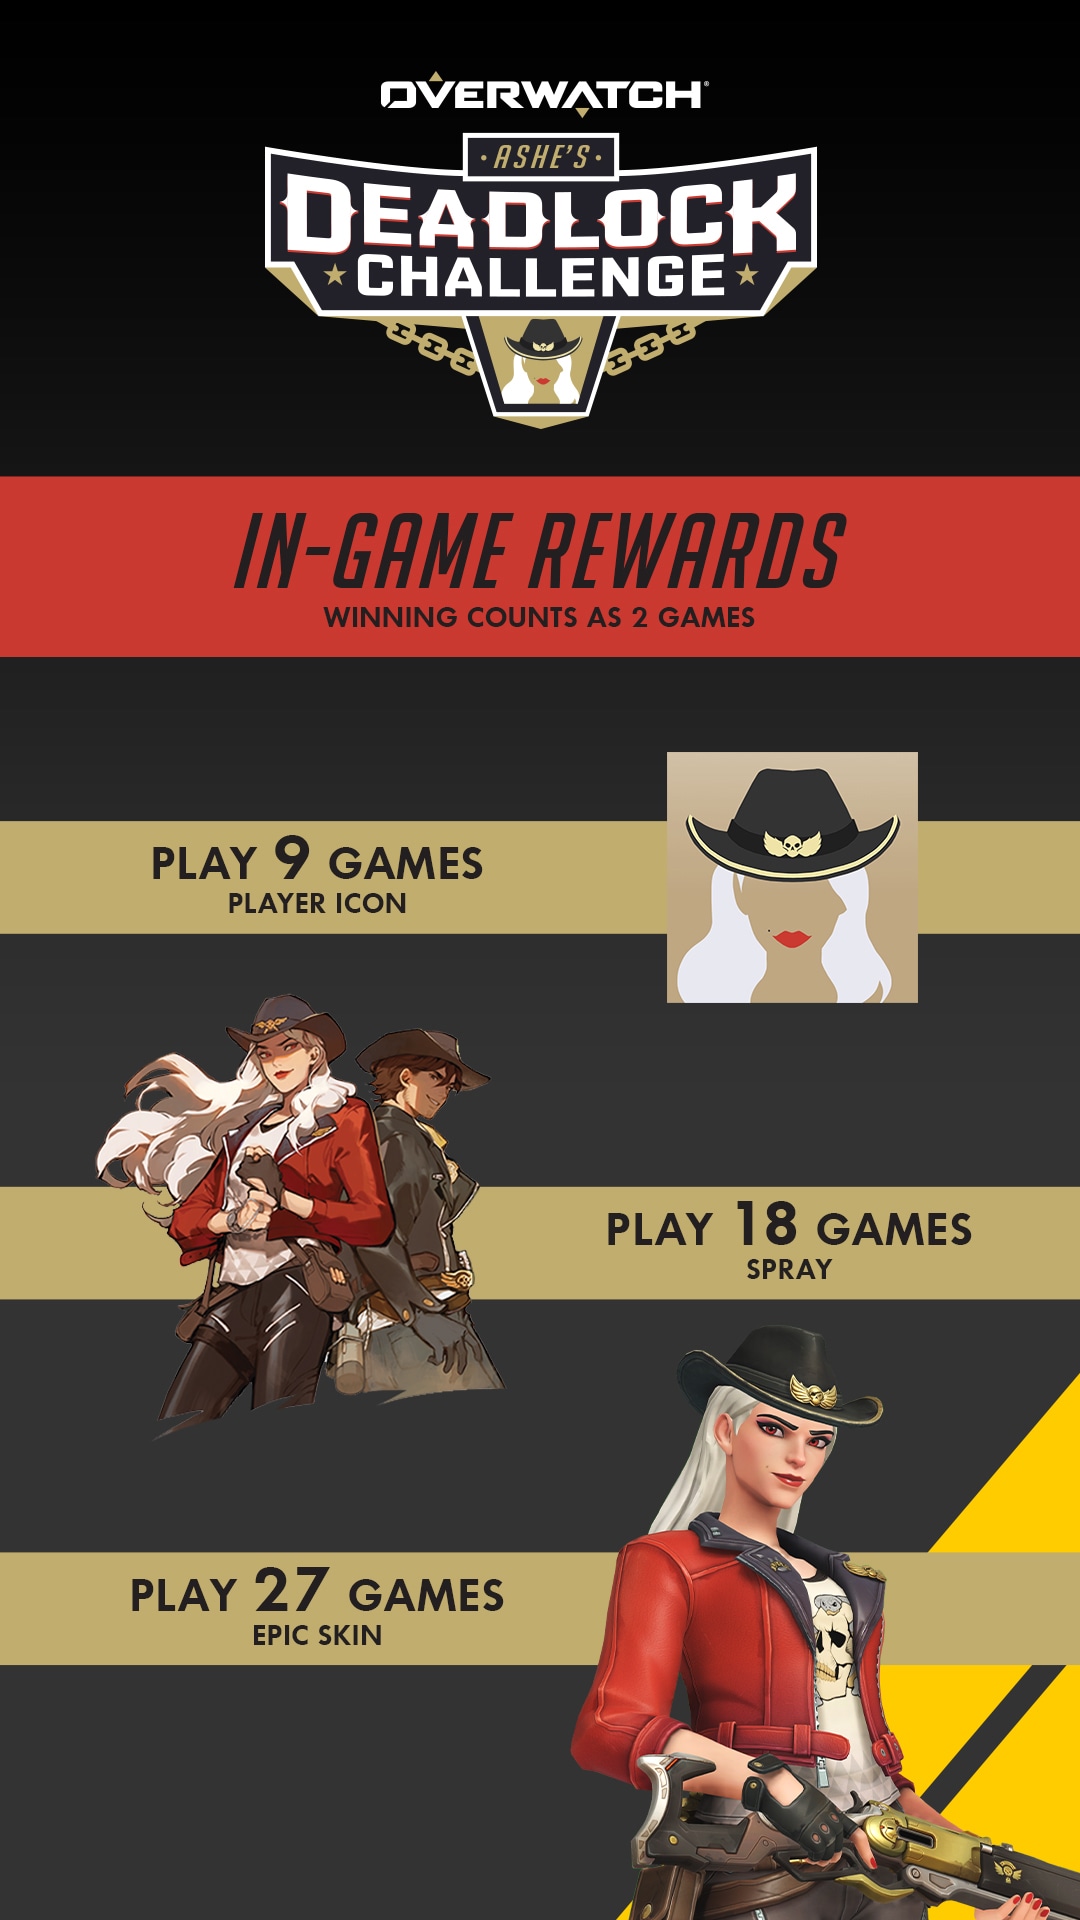 Earn Overwatch Ashe Deadlock Challenge rewards by playing 9, 18, and 27 games.